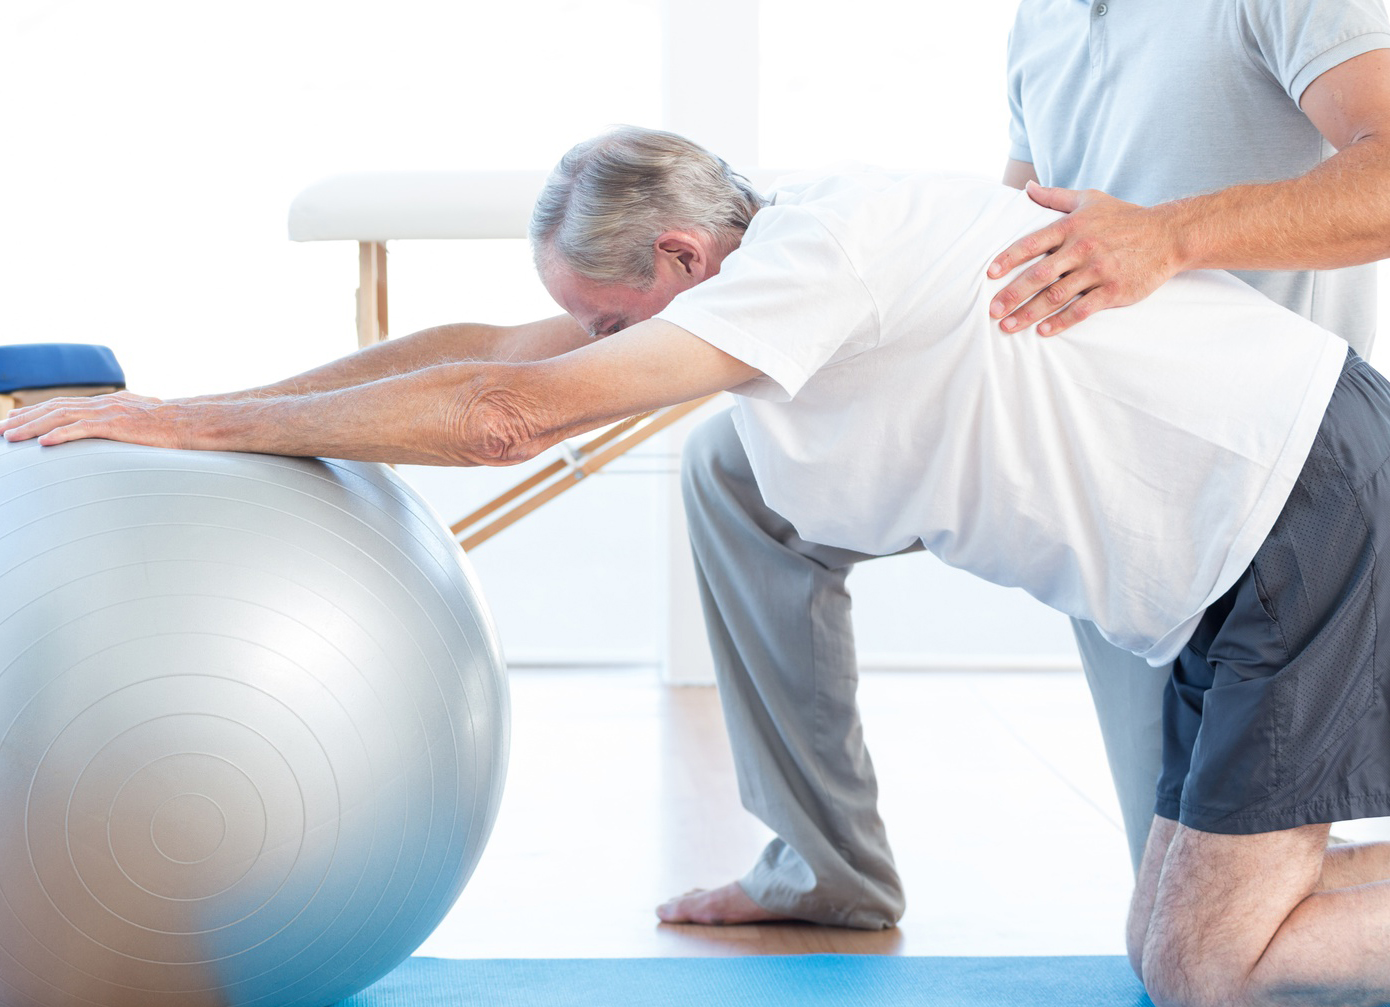 Physiotherapist helping man with exercise ball